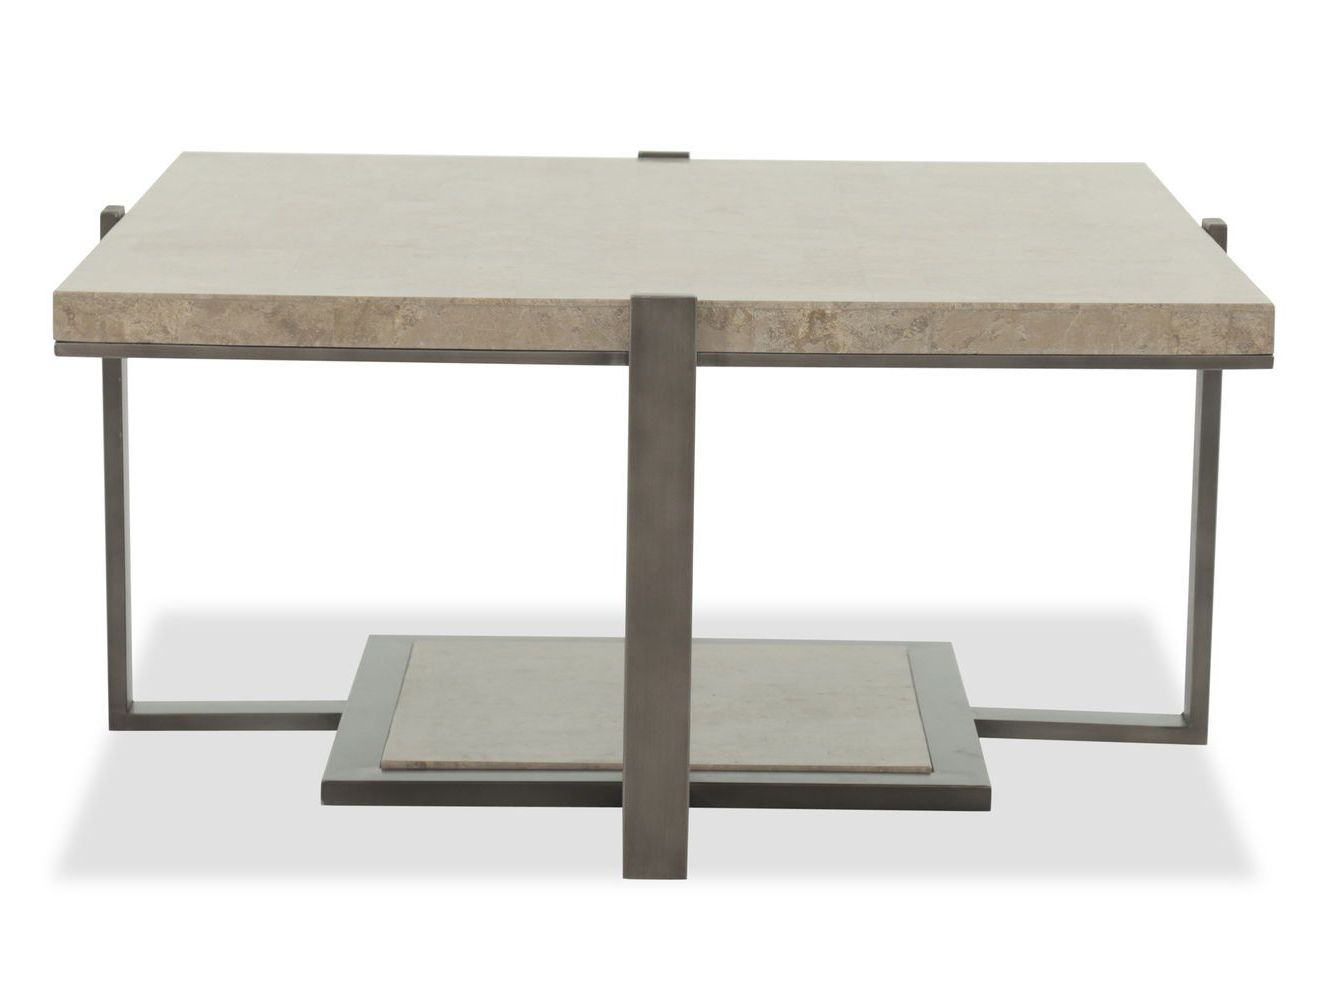 Square Modern Cocktail Table In Gray | Modern Cocktail Tables, Coffee Intended For Hassch Modern Square Cocktail Tables (View 15 of 20)